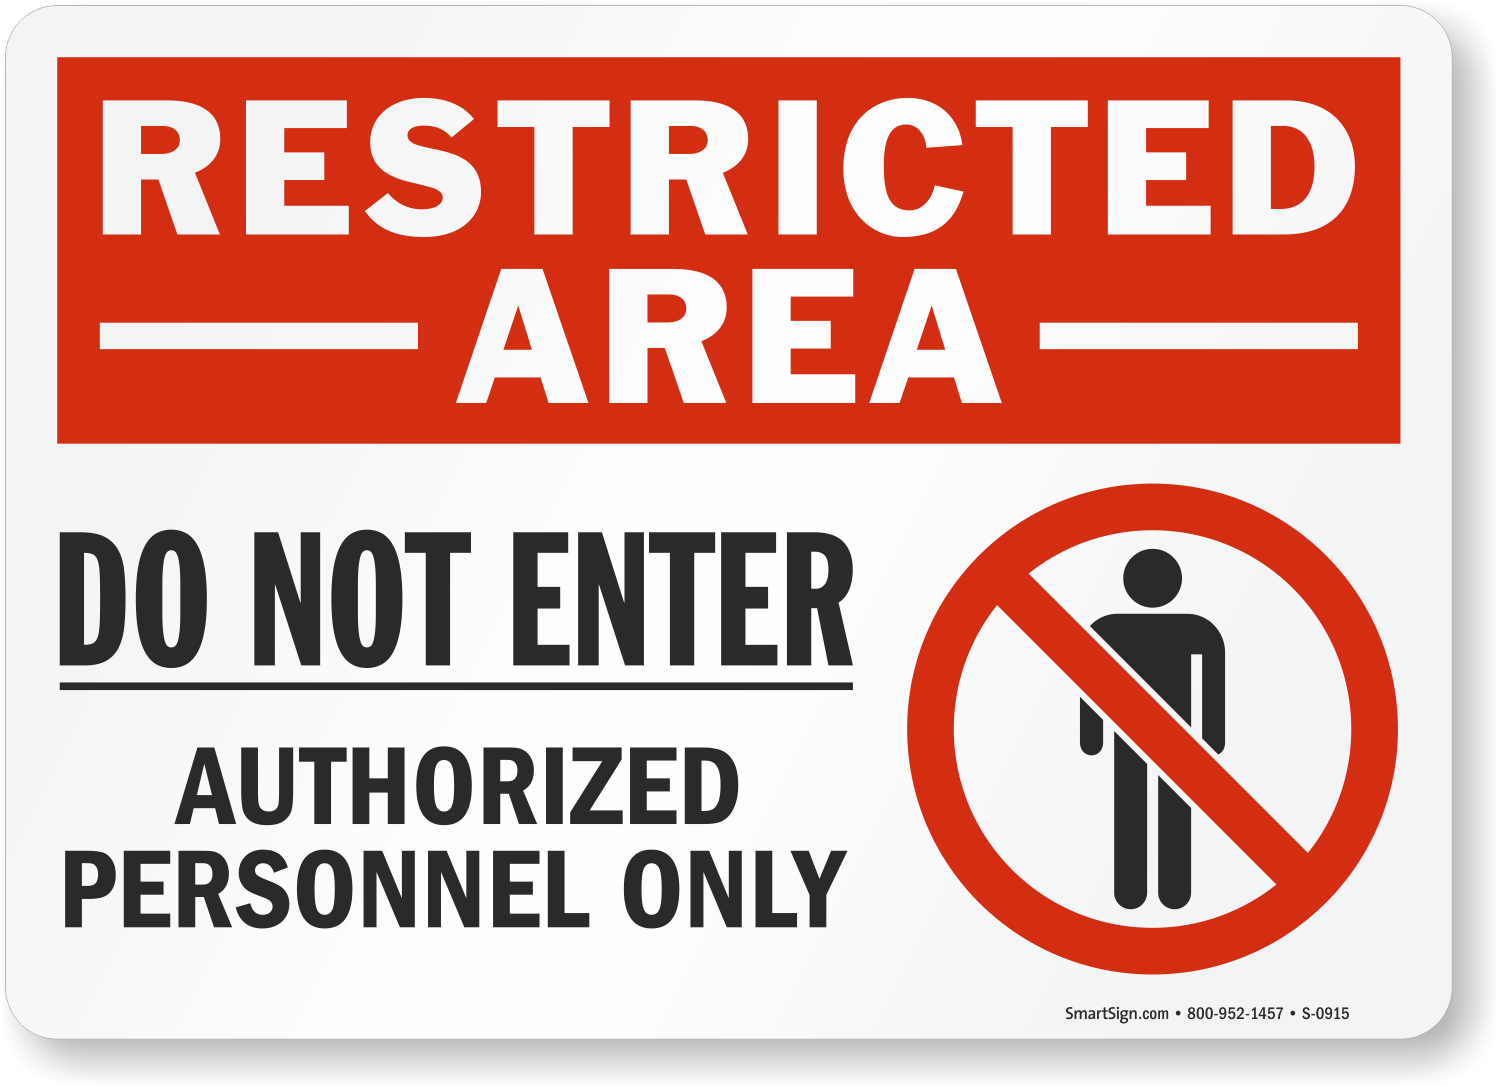 Allowed to work in the. Restricted area sign. Authorized personnel only. Предупреждение restricted. Do not enter authorized personnel only.